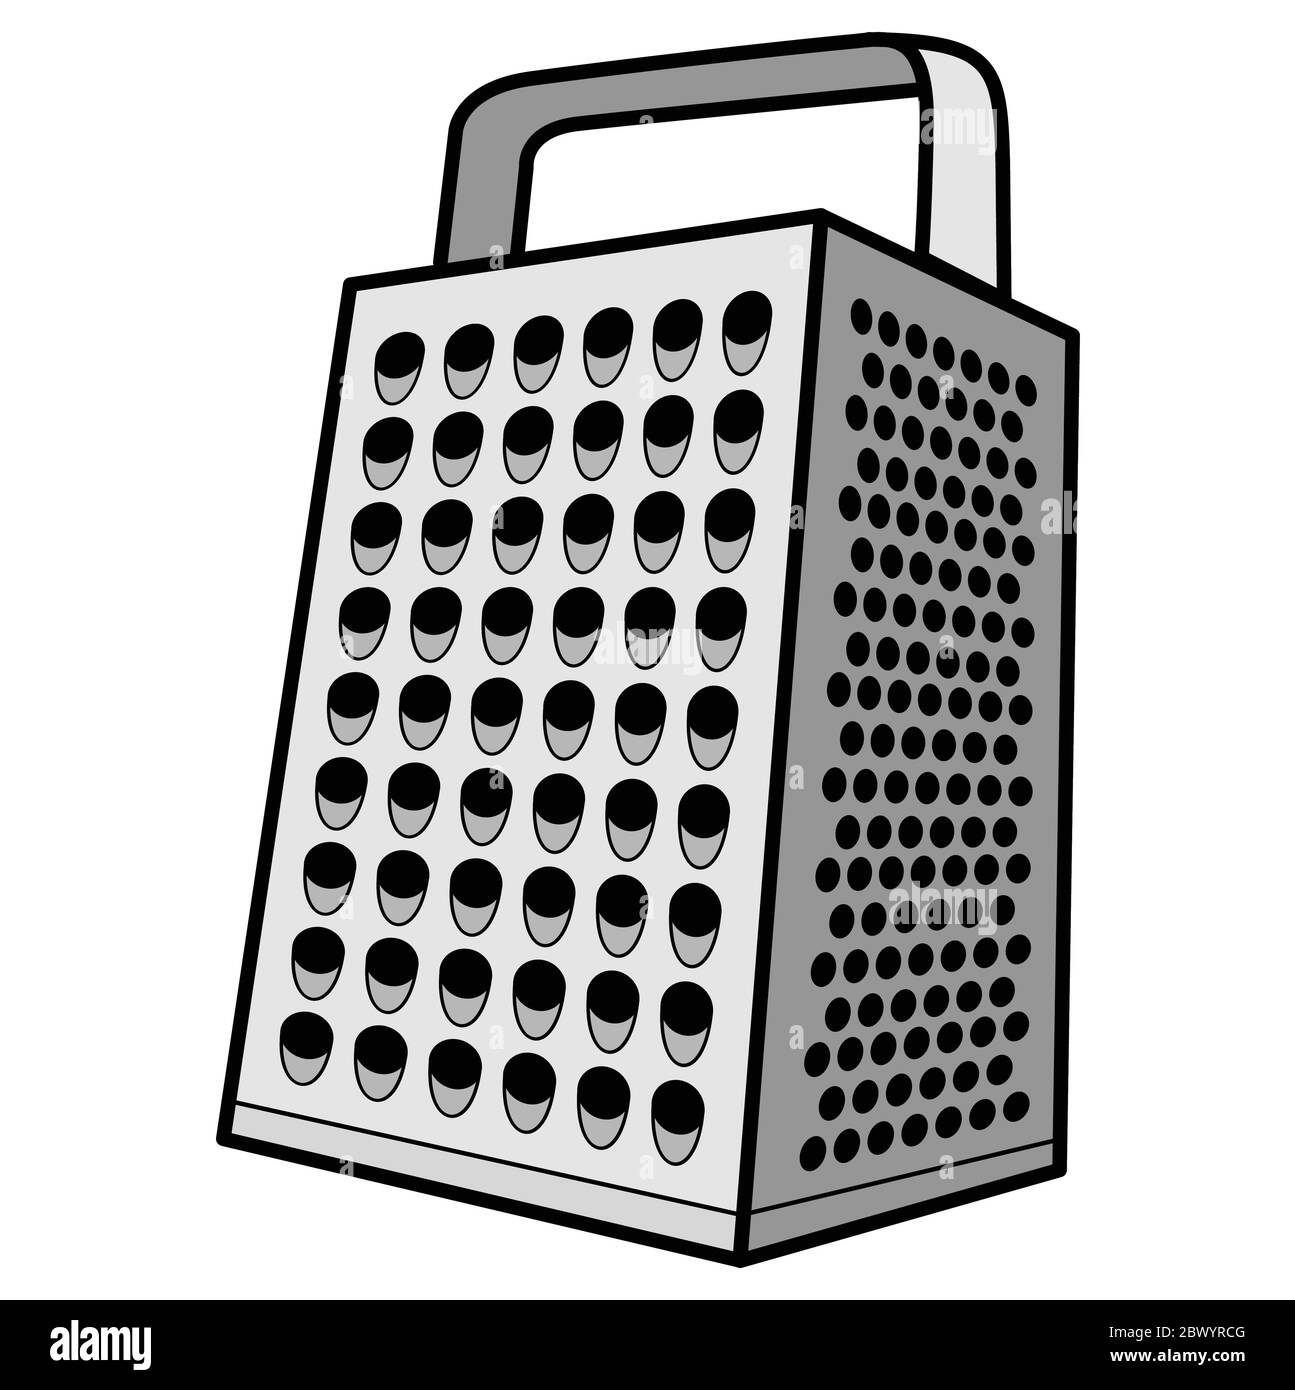 https://c8.alamy.com/comp/2BWYRCG/cheese-grater-an-illustration-of-a-cheese-grater-2BWYRCG.jpg